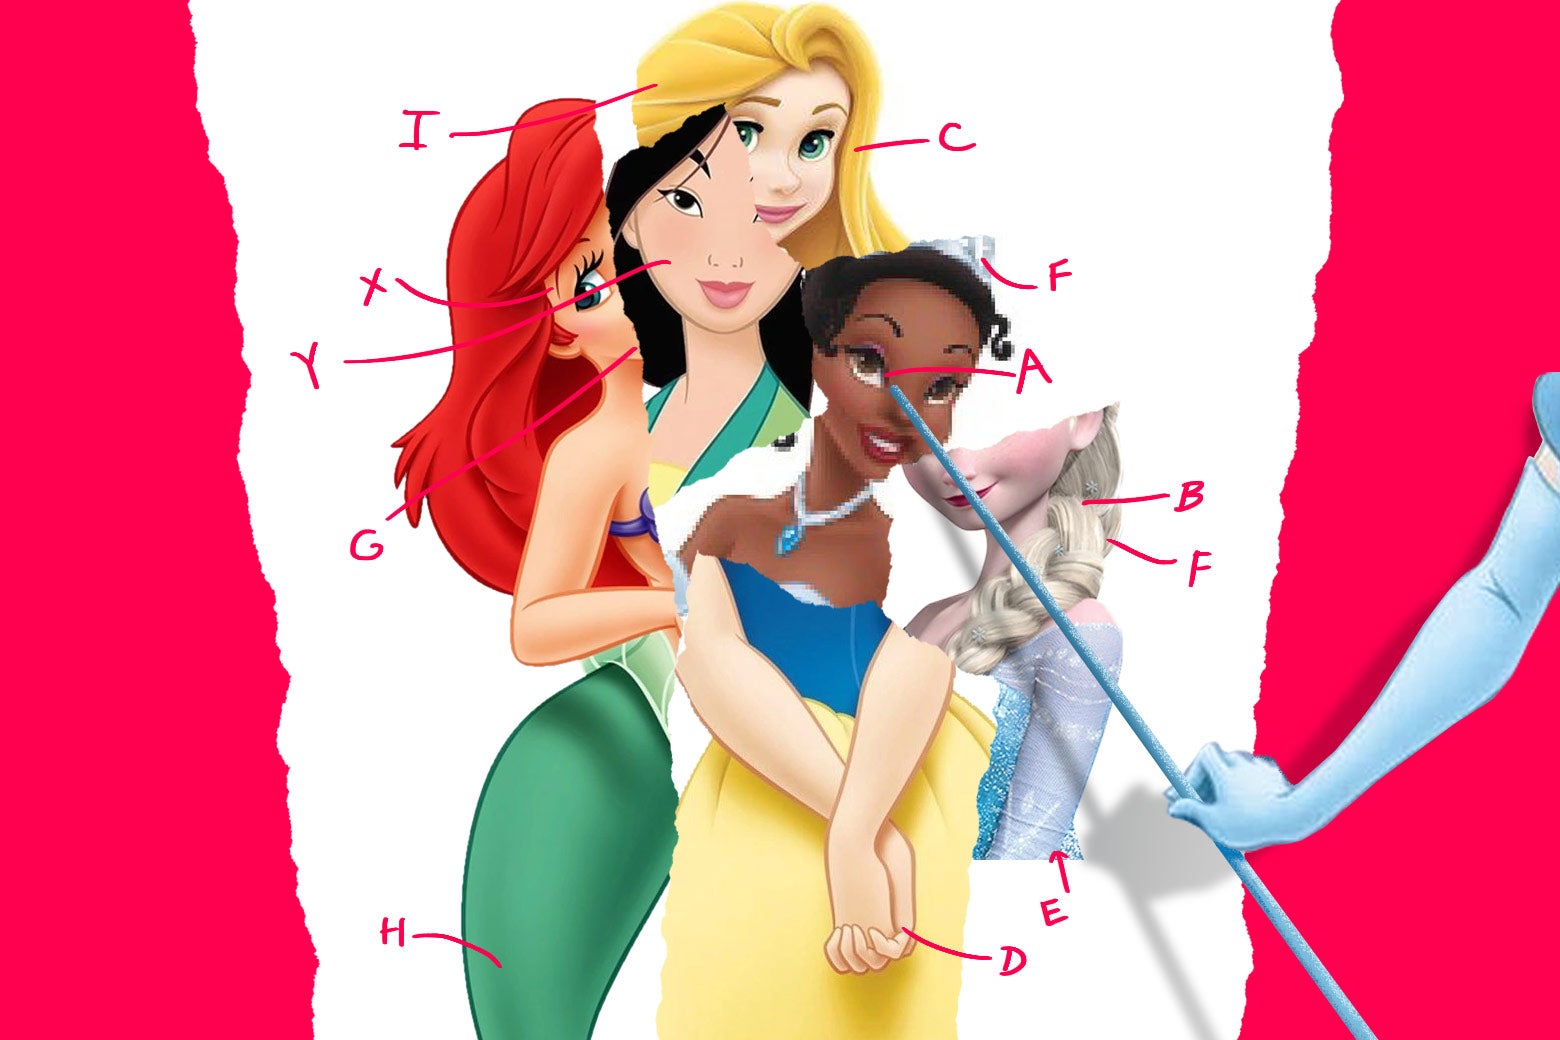 Why are we so obsessed with Disney princesses? pic